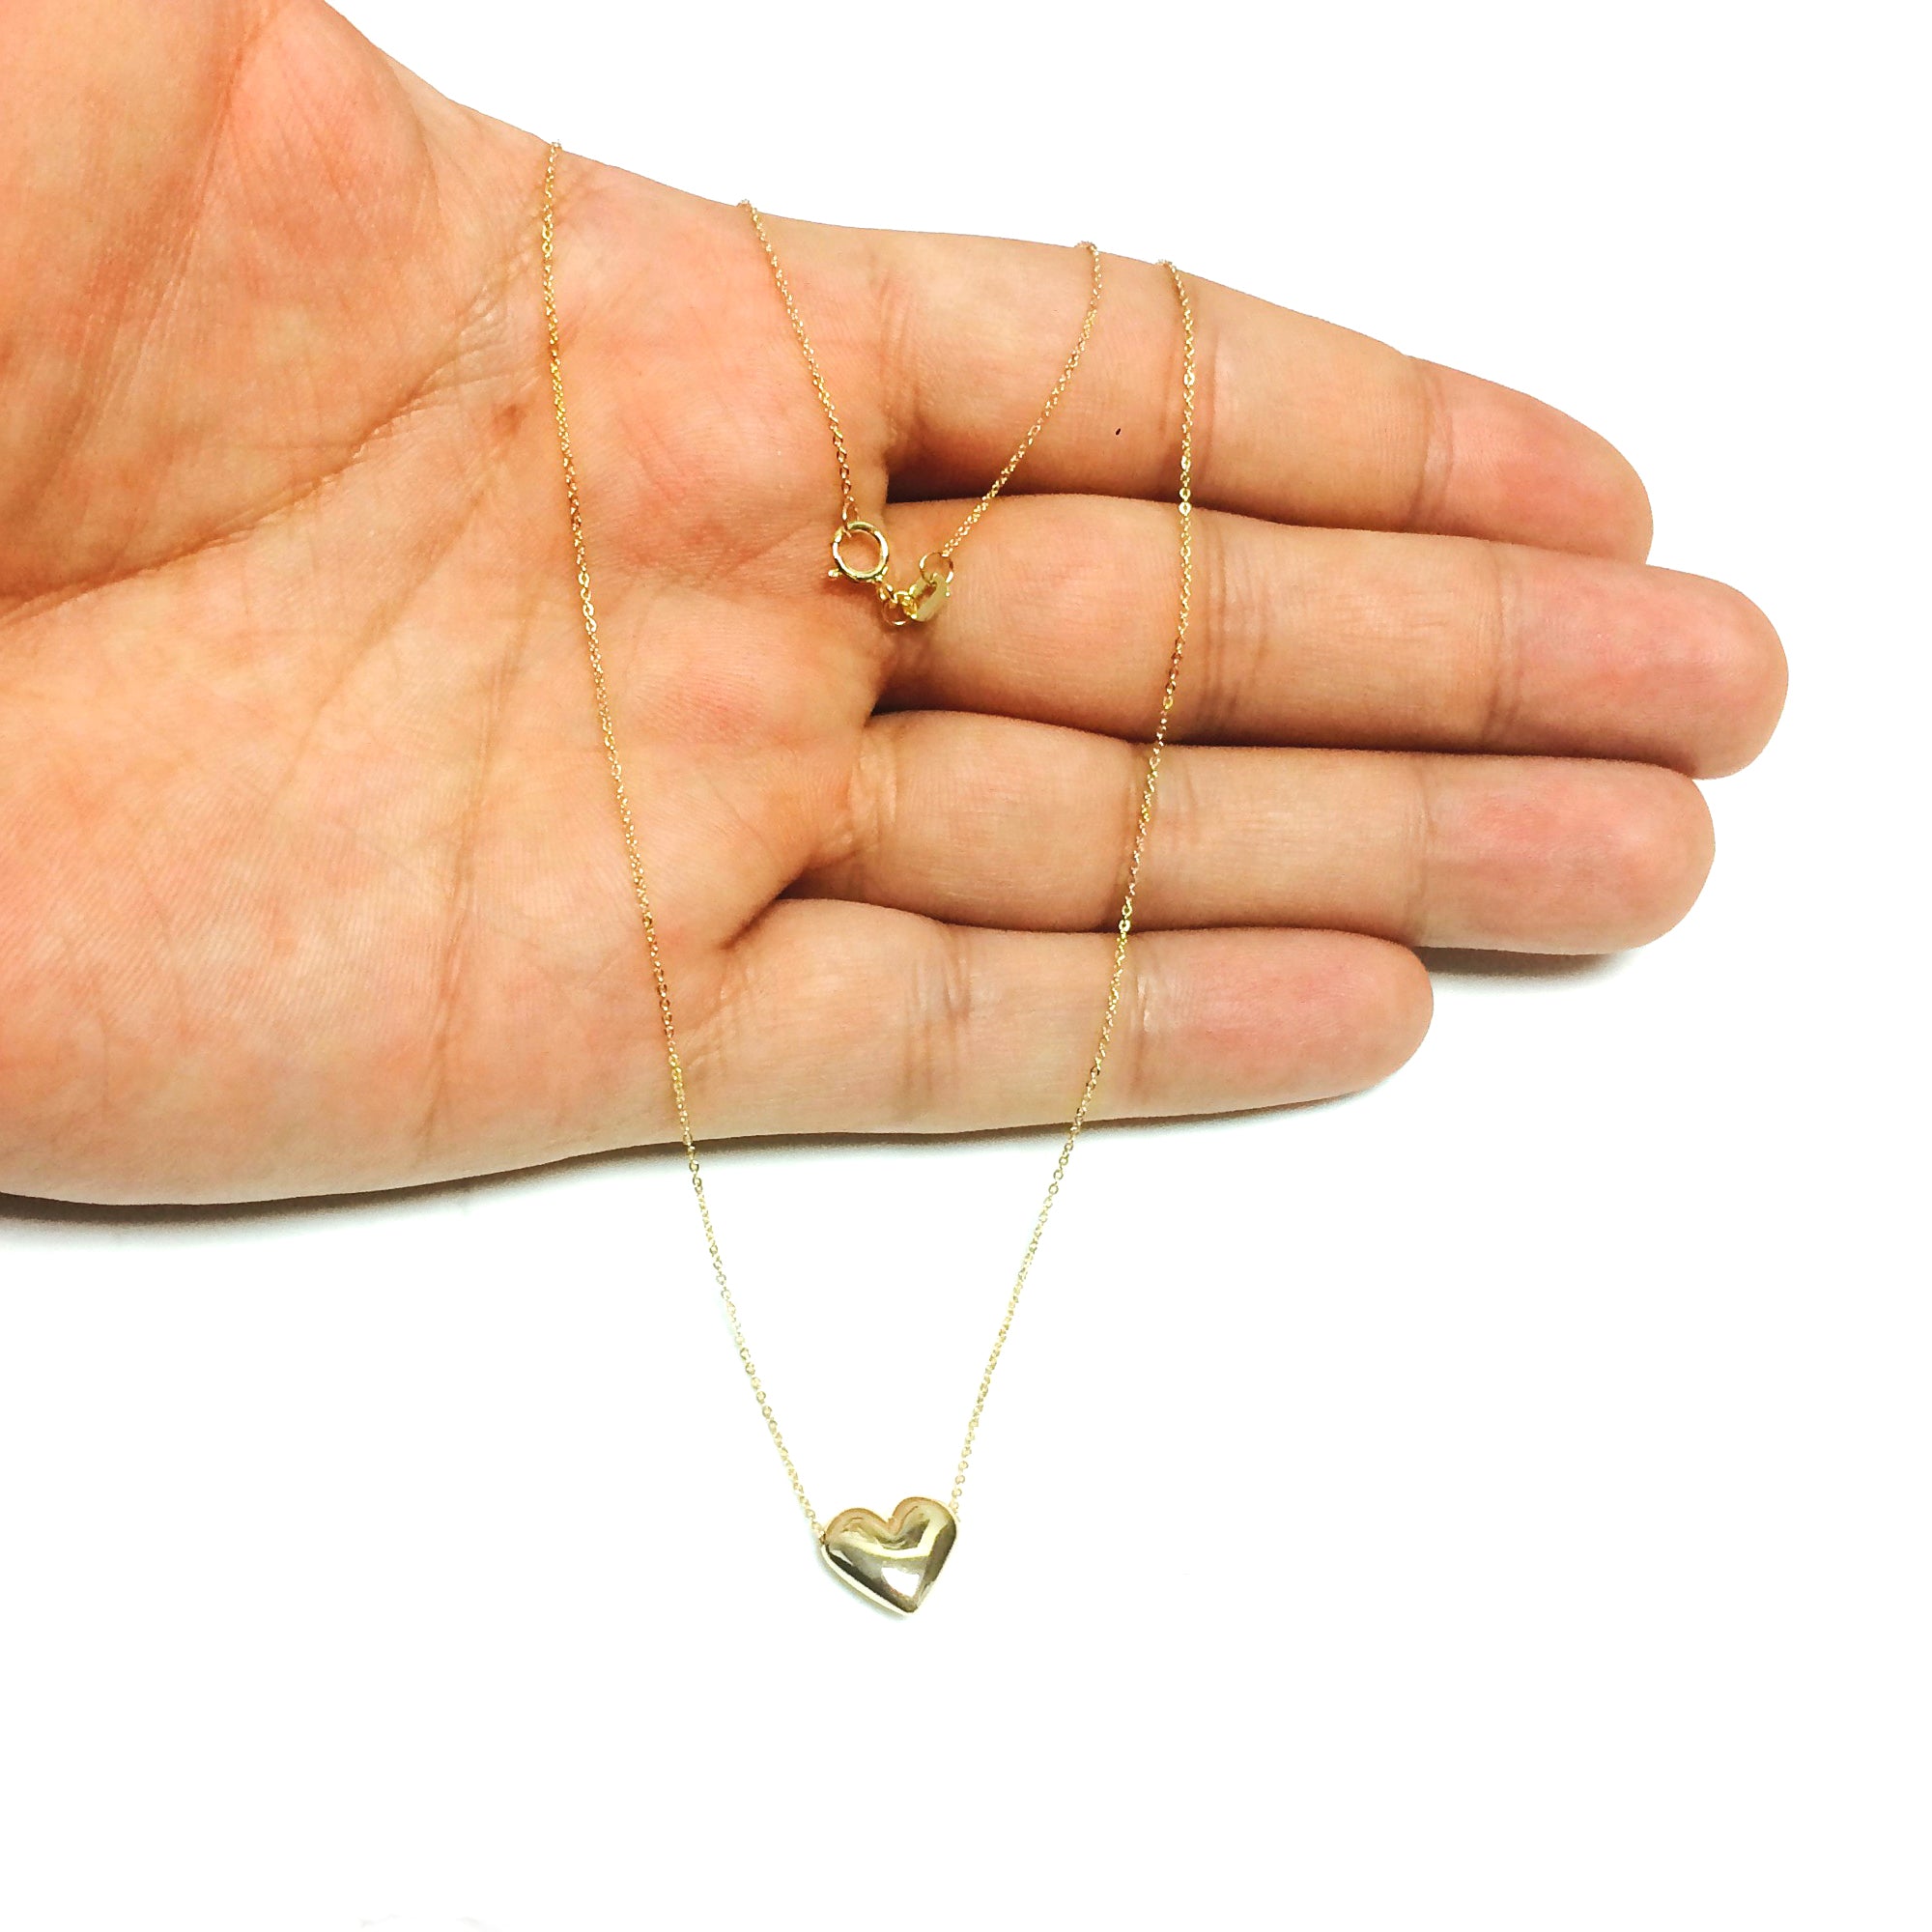 Real Gold Puffed Heart Pendant Necklace, 18" fine designer jewelry for men and women